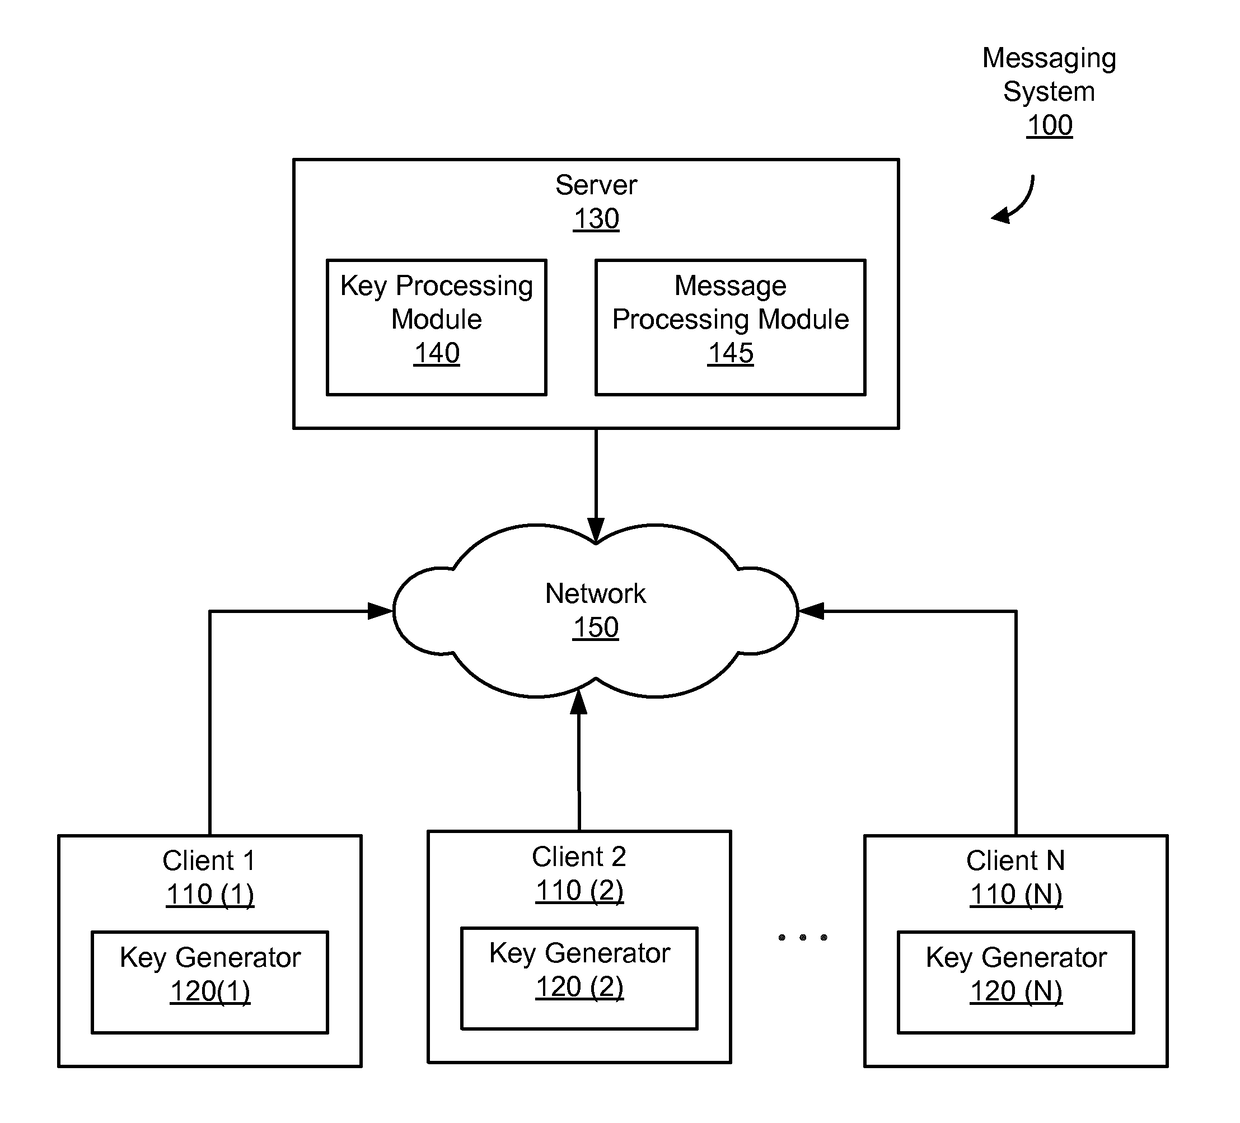 Identity-based encryption for securing access to stored messages